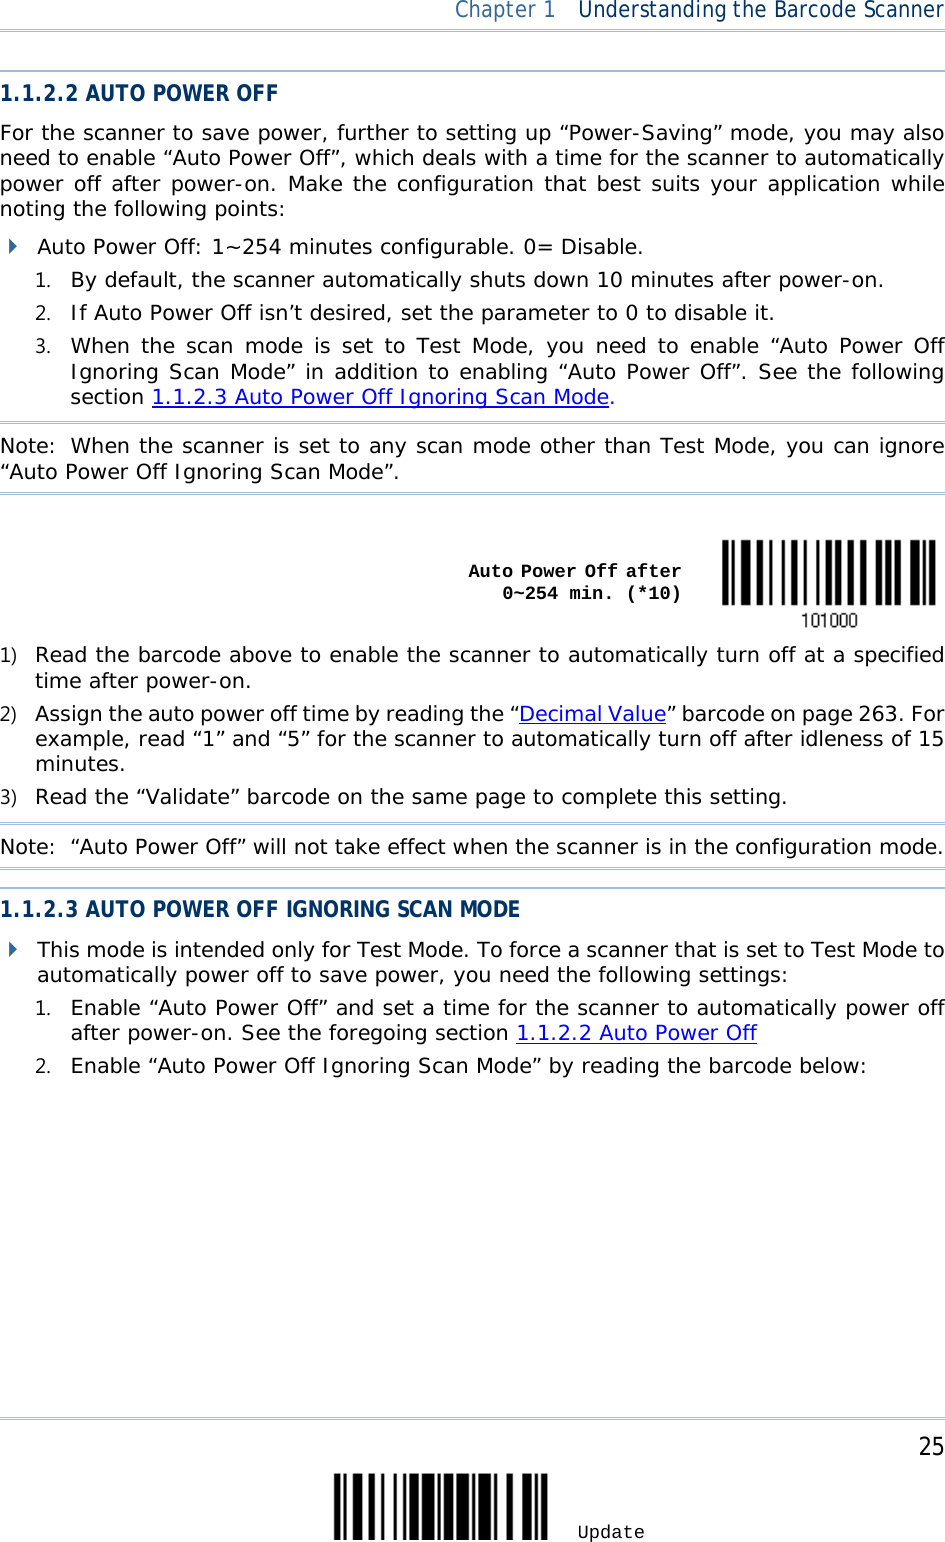  Chapter 1  Understanding the Barcode Scanner  1.1.2.2 AUTO POWER OFF For the scanner to save power, further to setting up “Power-Saving” mode, you may also need to enable “Auto Power Off”, which deals with a time for the scanner to automatically power off after power-on. Make the configuration that best suits your application while noting the following points:  Auto Power Off: 1~254 minutes configurable. 0= Disable. 1. By default, the scanner automatically shuts down 10 minutes after power-on. 2. If Auto Power Off isn’t desired, set the parameter to 0 to disable it. 3. When the scan mode is set to Test Mode, you need to enable “Auto Power Off Ignoring Scan Mode” in addition to enabling “Auto Power Off”. See the following section 1.1.2.3 Auto Power Off Ignoring Scan Mode. Note: When the scanner is set to any scan mode other than Test Mode, you can ignore “Auto Power Off Ignoring Scan Mode”.     Auto Power Off after            0~254 min. (*10)  1) Read the barcode above to enable the scanner to automatically turn off at a specified time after power-on. 2) Assign the auto power off time by reading the “Decimal Value” barcode on page 263. For example, read “1” and “5” for the scanner to automatically turn off after idleness of 15 minutes.  3) Read the “Validate” barcode on the same page to complete this setting. Note:  “Auto Power Off” will not take effect when the scanner is in the configuration mode. 1.1.2.3 AUTO POWER OFF IGNORING SCAN MODE  This mode is intended only for Test Mode. To force a scanner that is set to Test Mode to automatically power off to save power, you need the following settings: 1. Enable “Auto Power Off” and set a time for the scanner to automatically power off after power-on. See the foregoing section 1.1.2.2 Auto Power Off 2. Enable “Auto Power Off Ignoring Scan Mode” by reading the barcode below:     25 Update 